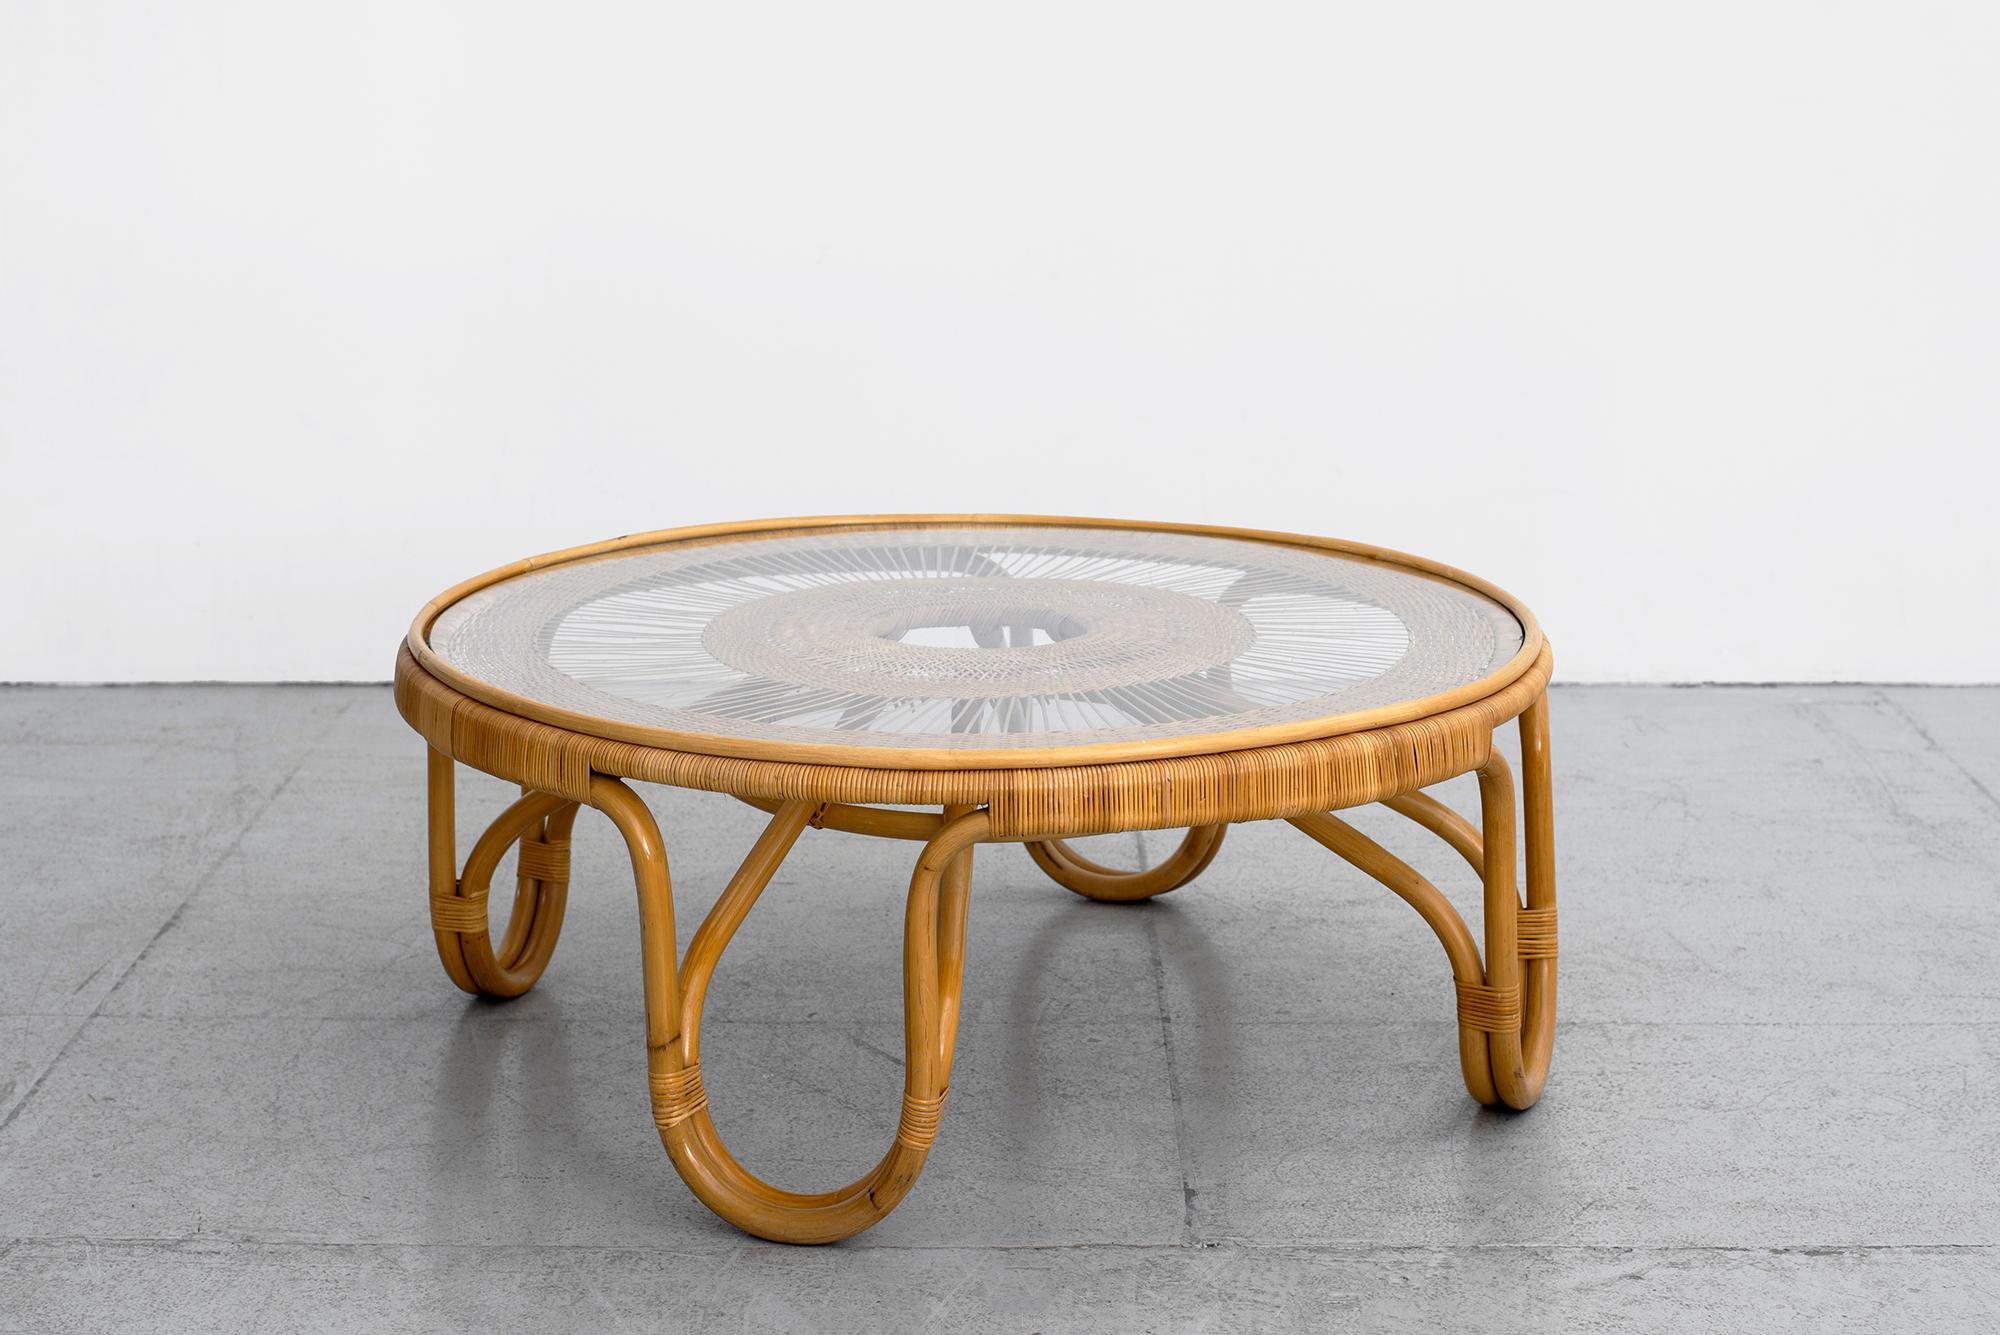 Wonderful French coffee table circa 1950s in wicker and rattan.
Hairpin shaped legs with detailed wicker weaving and glass top.
Wonderful piece.
   